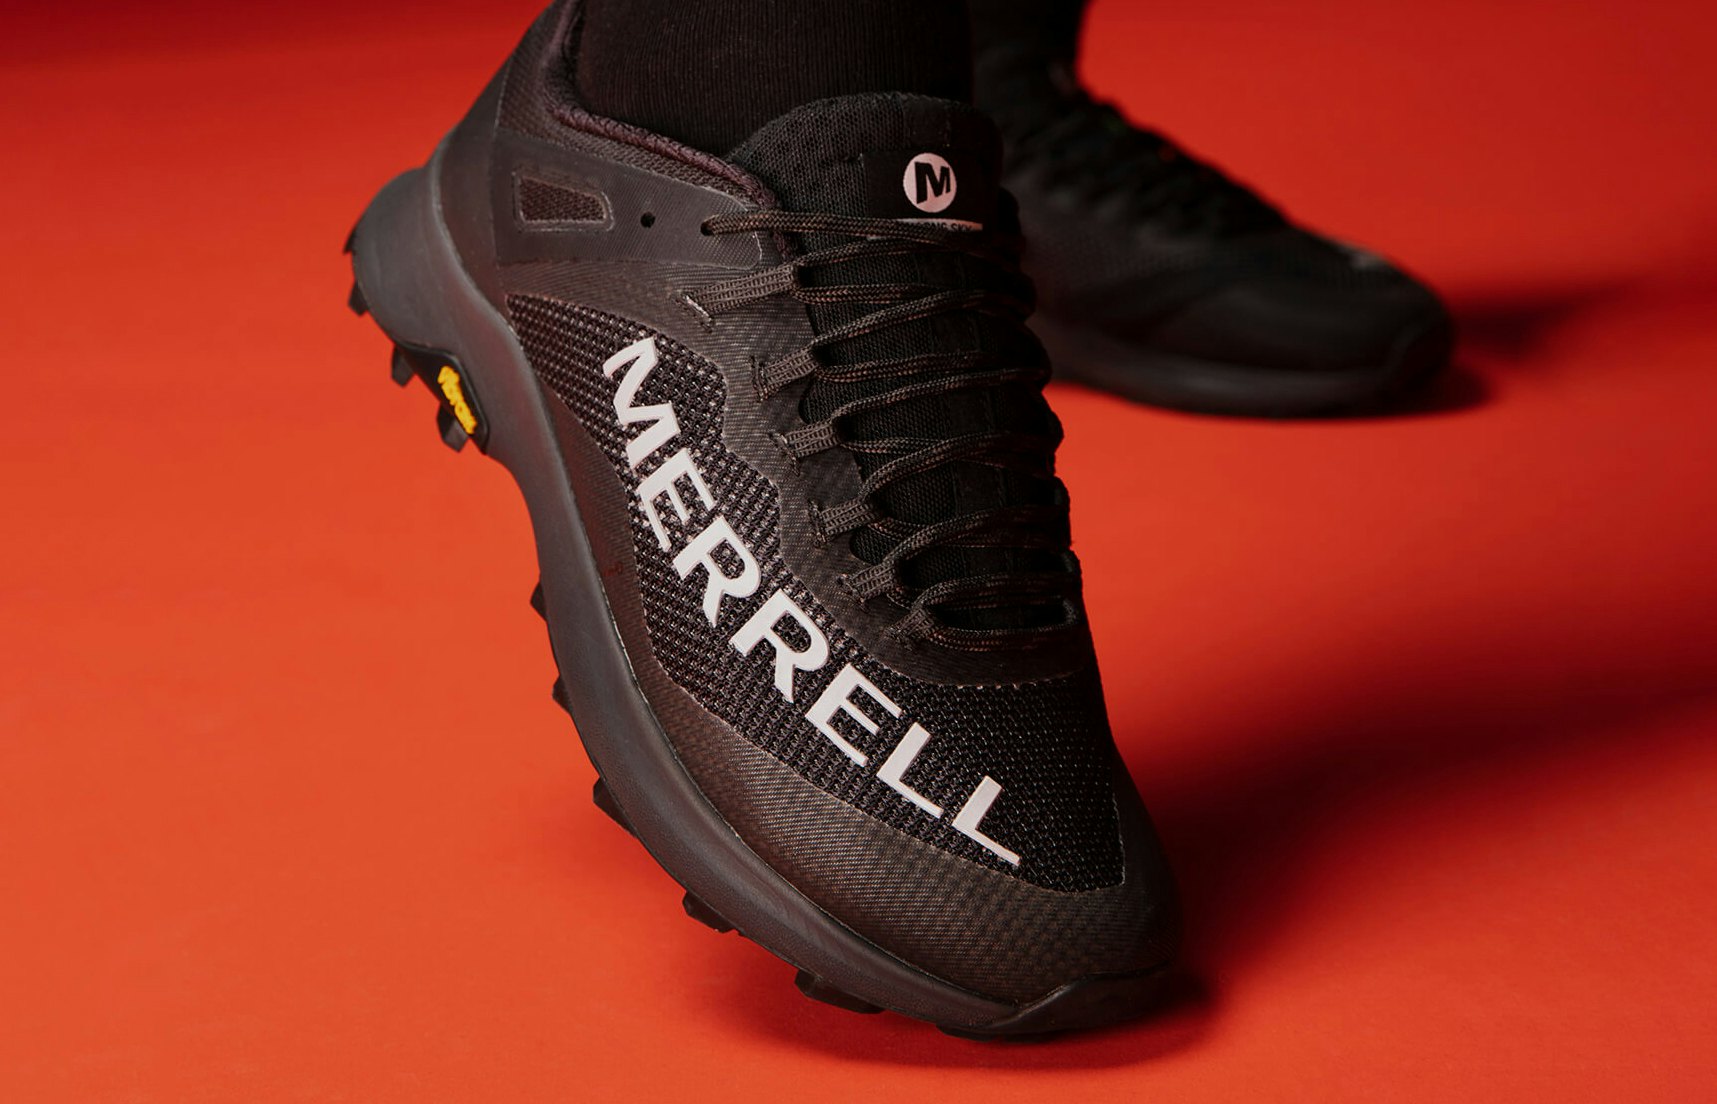 Merrell's new technical hiking shoes 